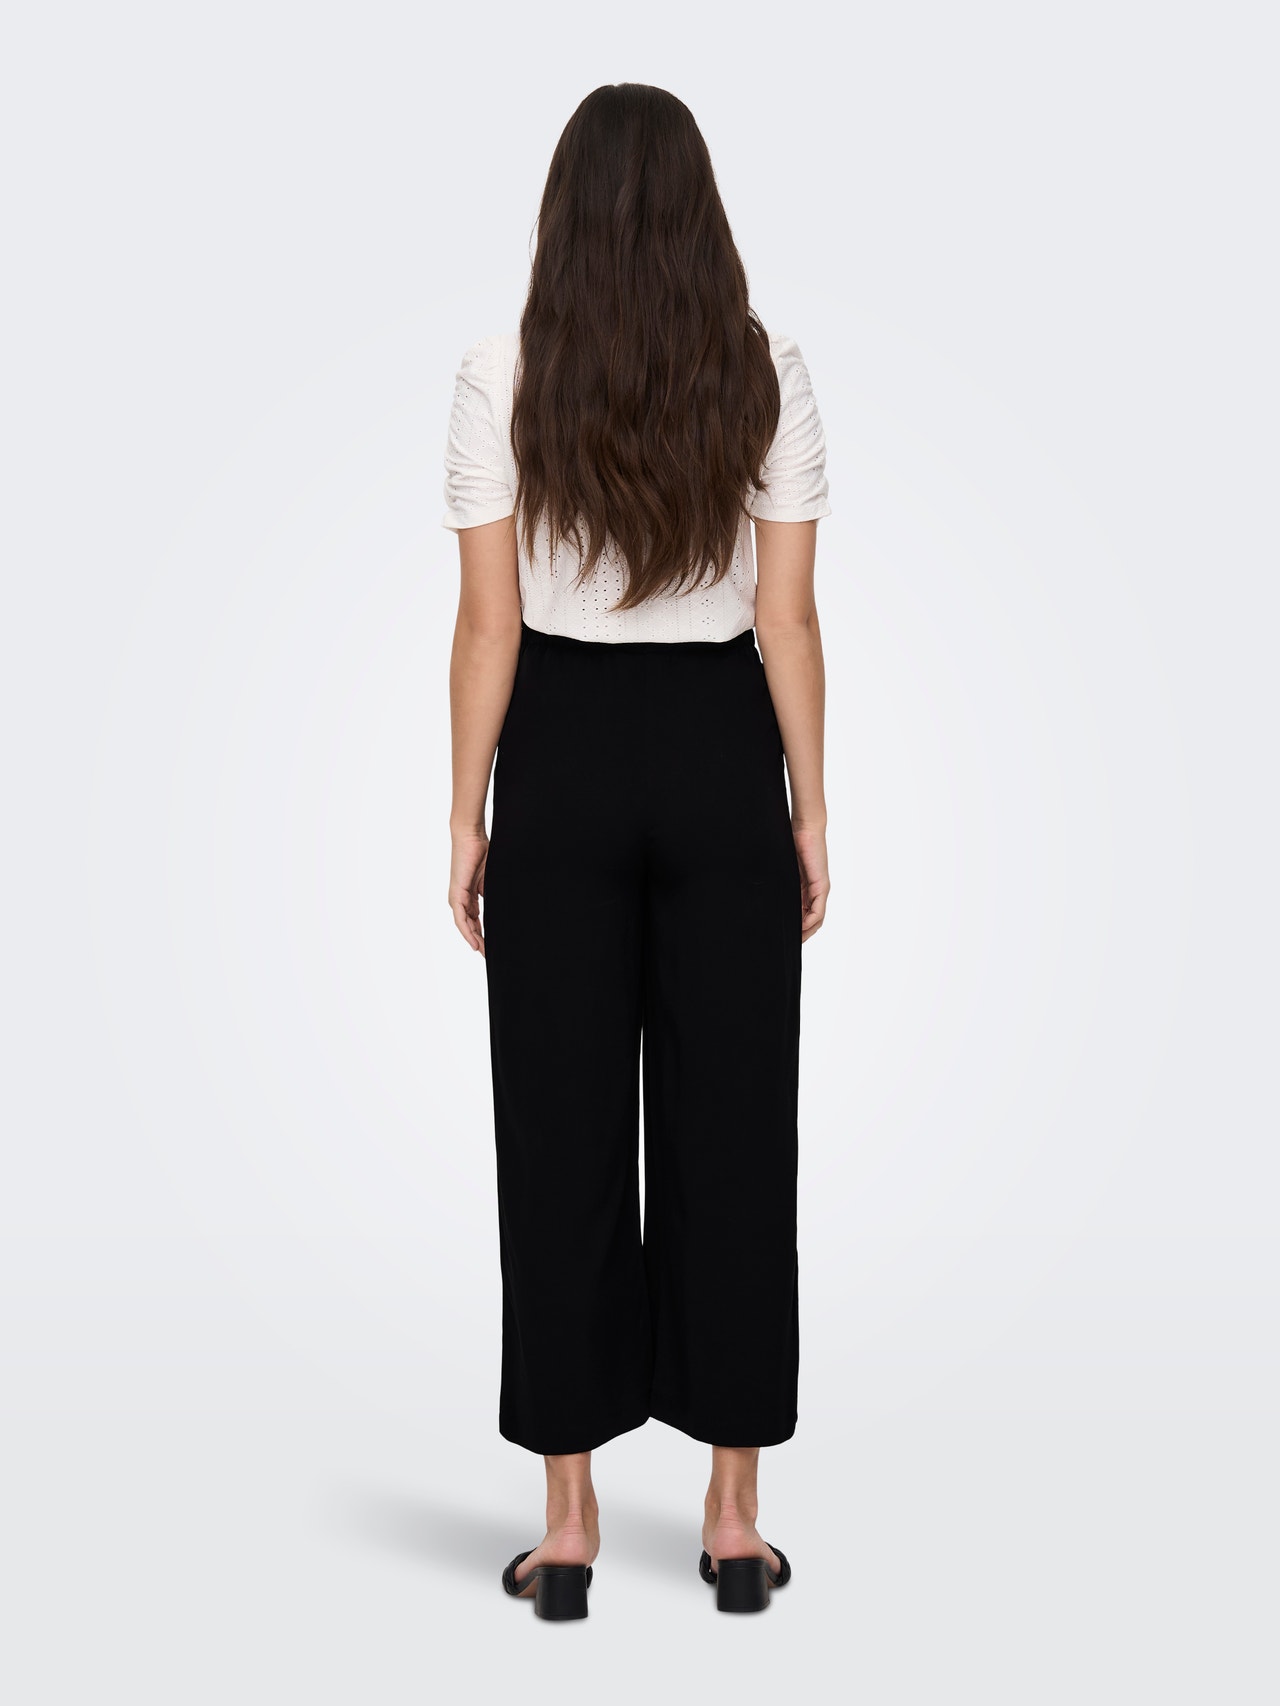 ONLY Mama high waist trousers -Black - 15267622